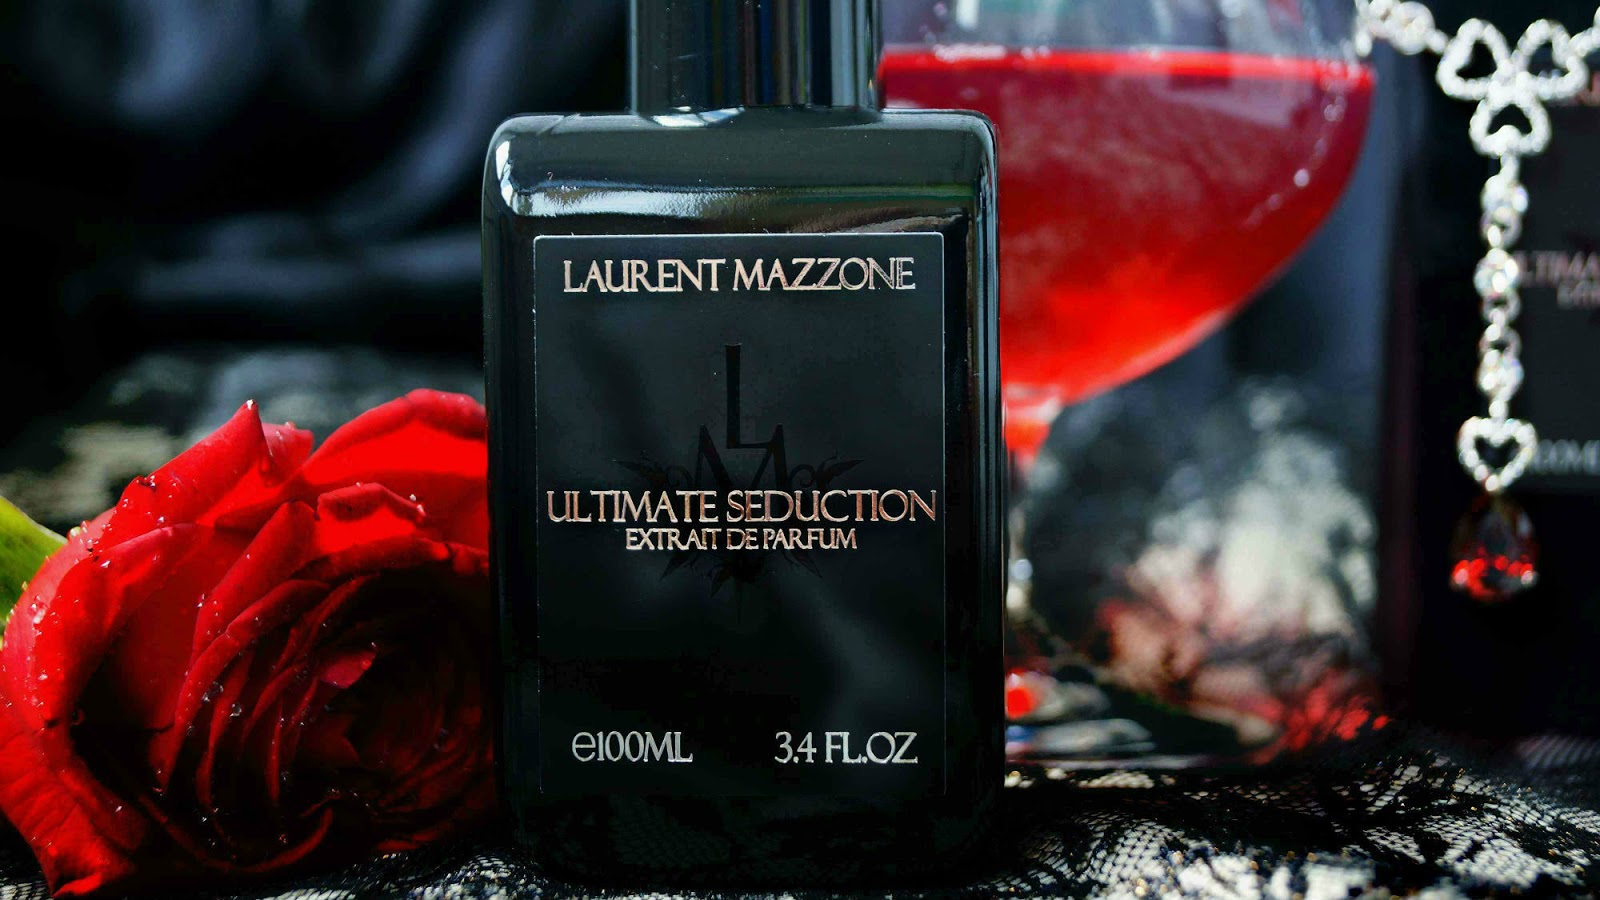 Laurent mazzone pear. LM Parfums Ultimate Seduction. Laurent Mazzone Ultimate Seduction. Парфюм Laurent Mazzone. LM Parfums (Laurent Mazzone Parfums) Dulce Pear.